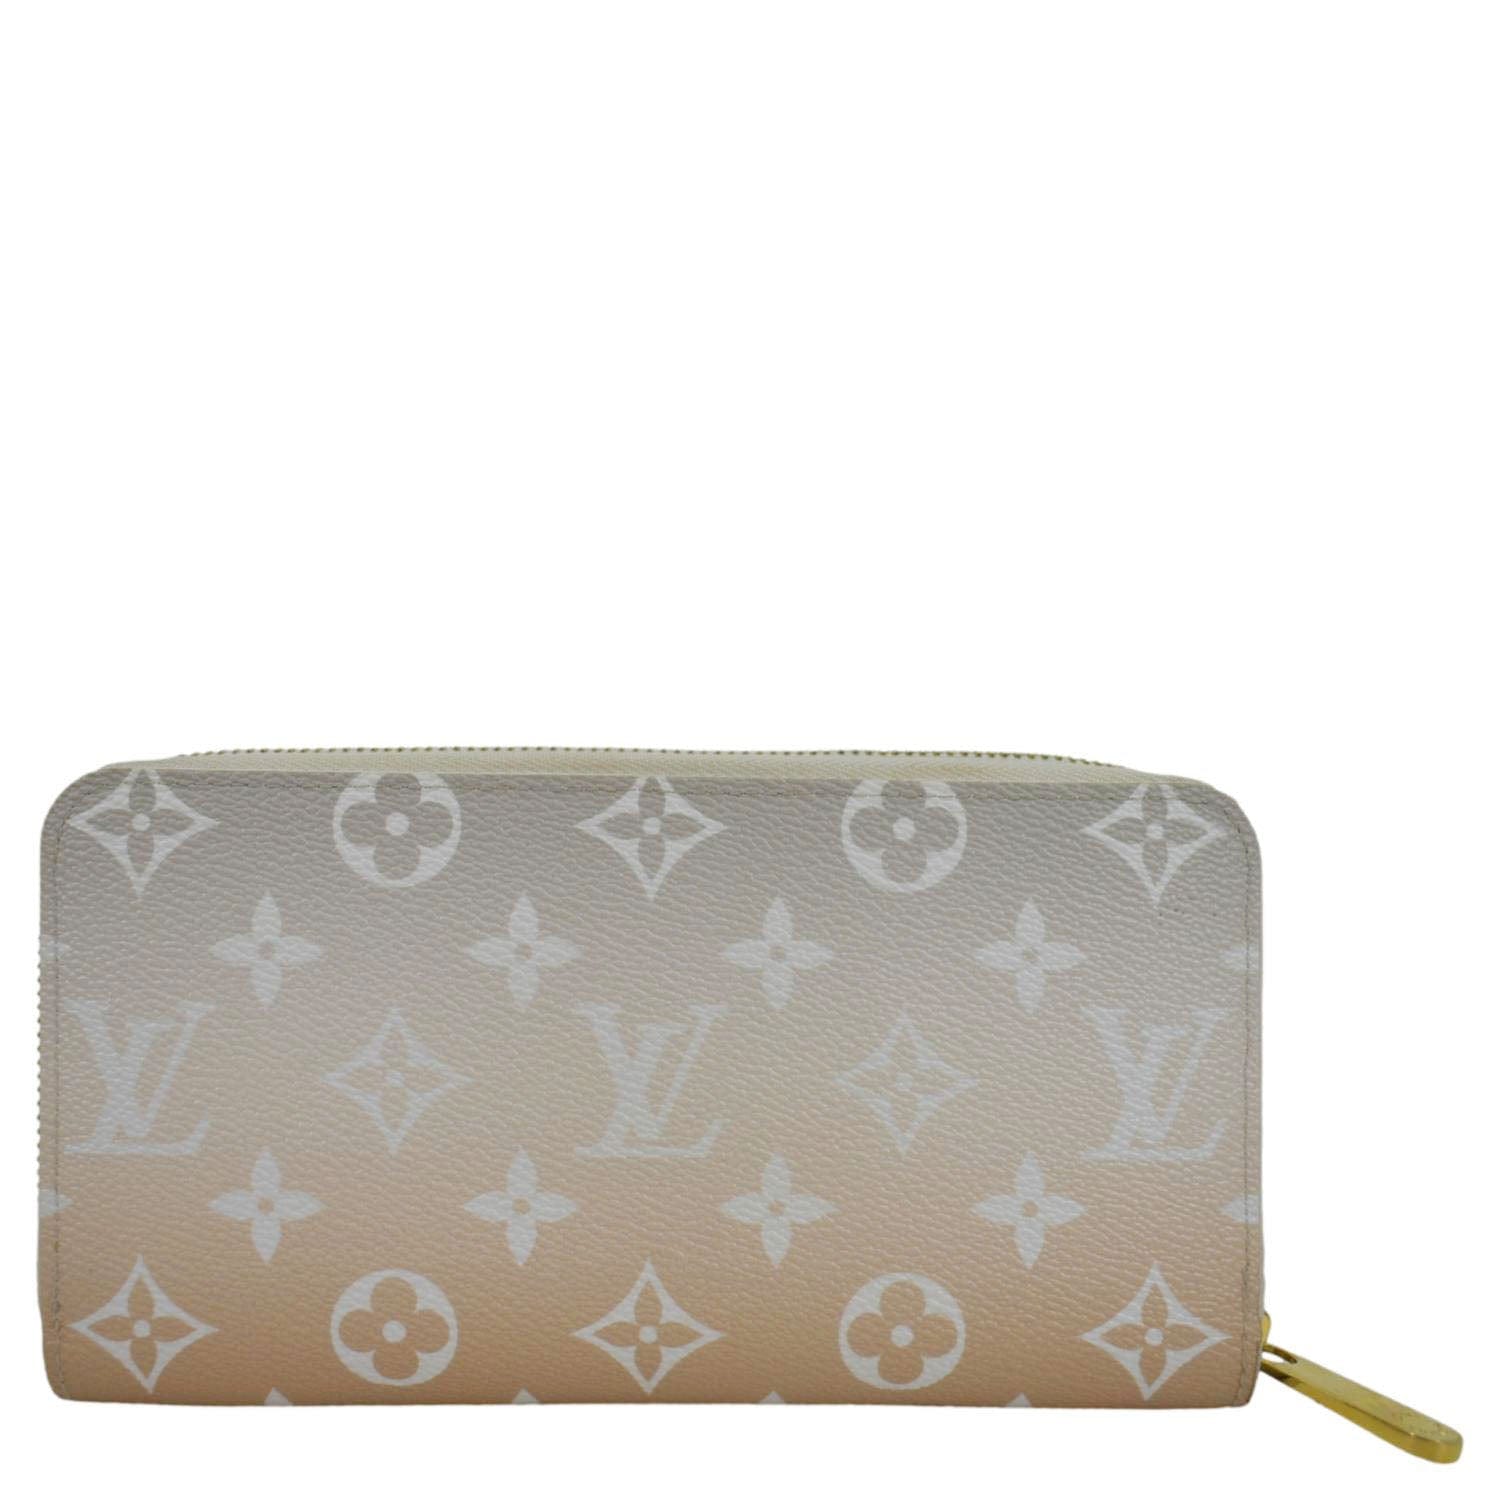 Louis Vuitton By Pool Neverfull AND matching Zippy wallet in MIST color